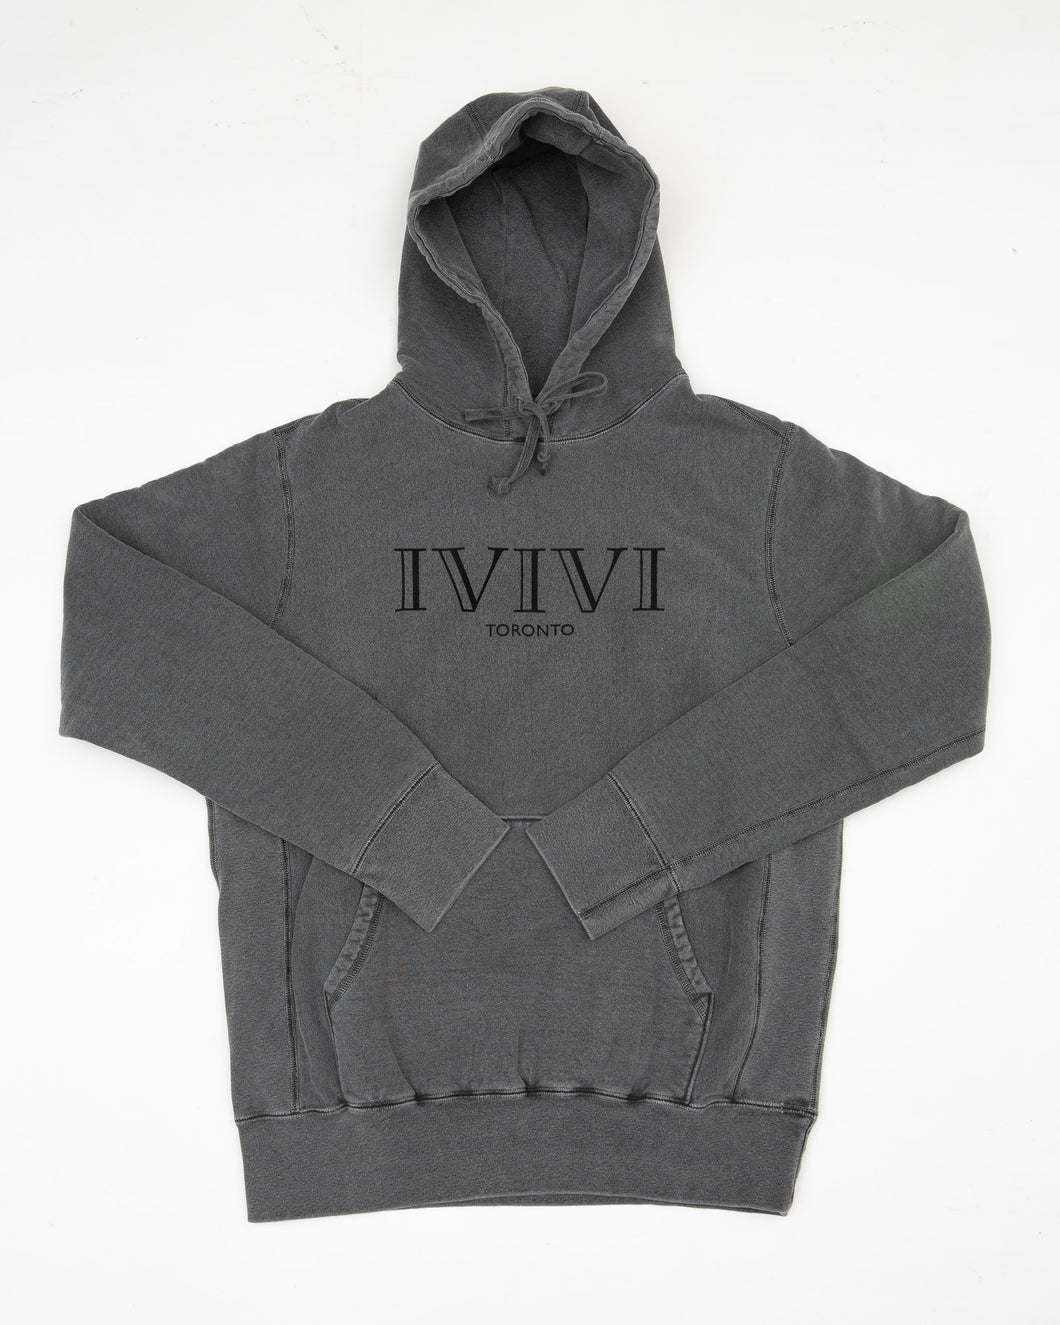 IVIVI Logo Hoodie - Cotton Distressed Charcoal